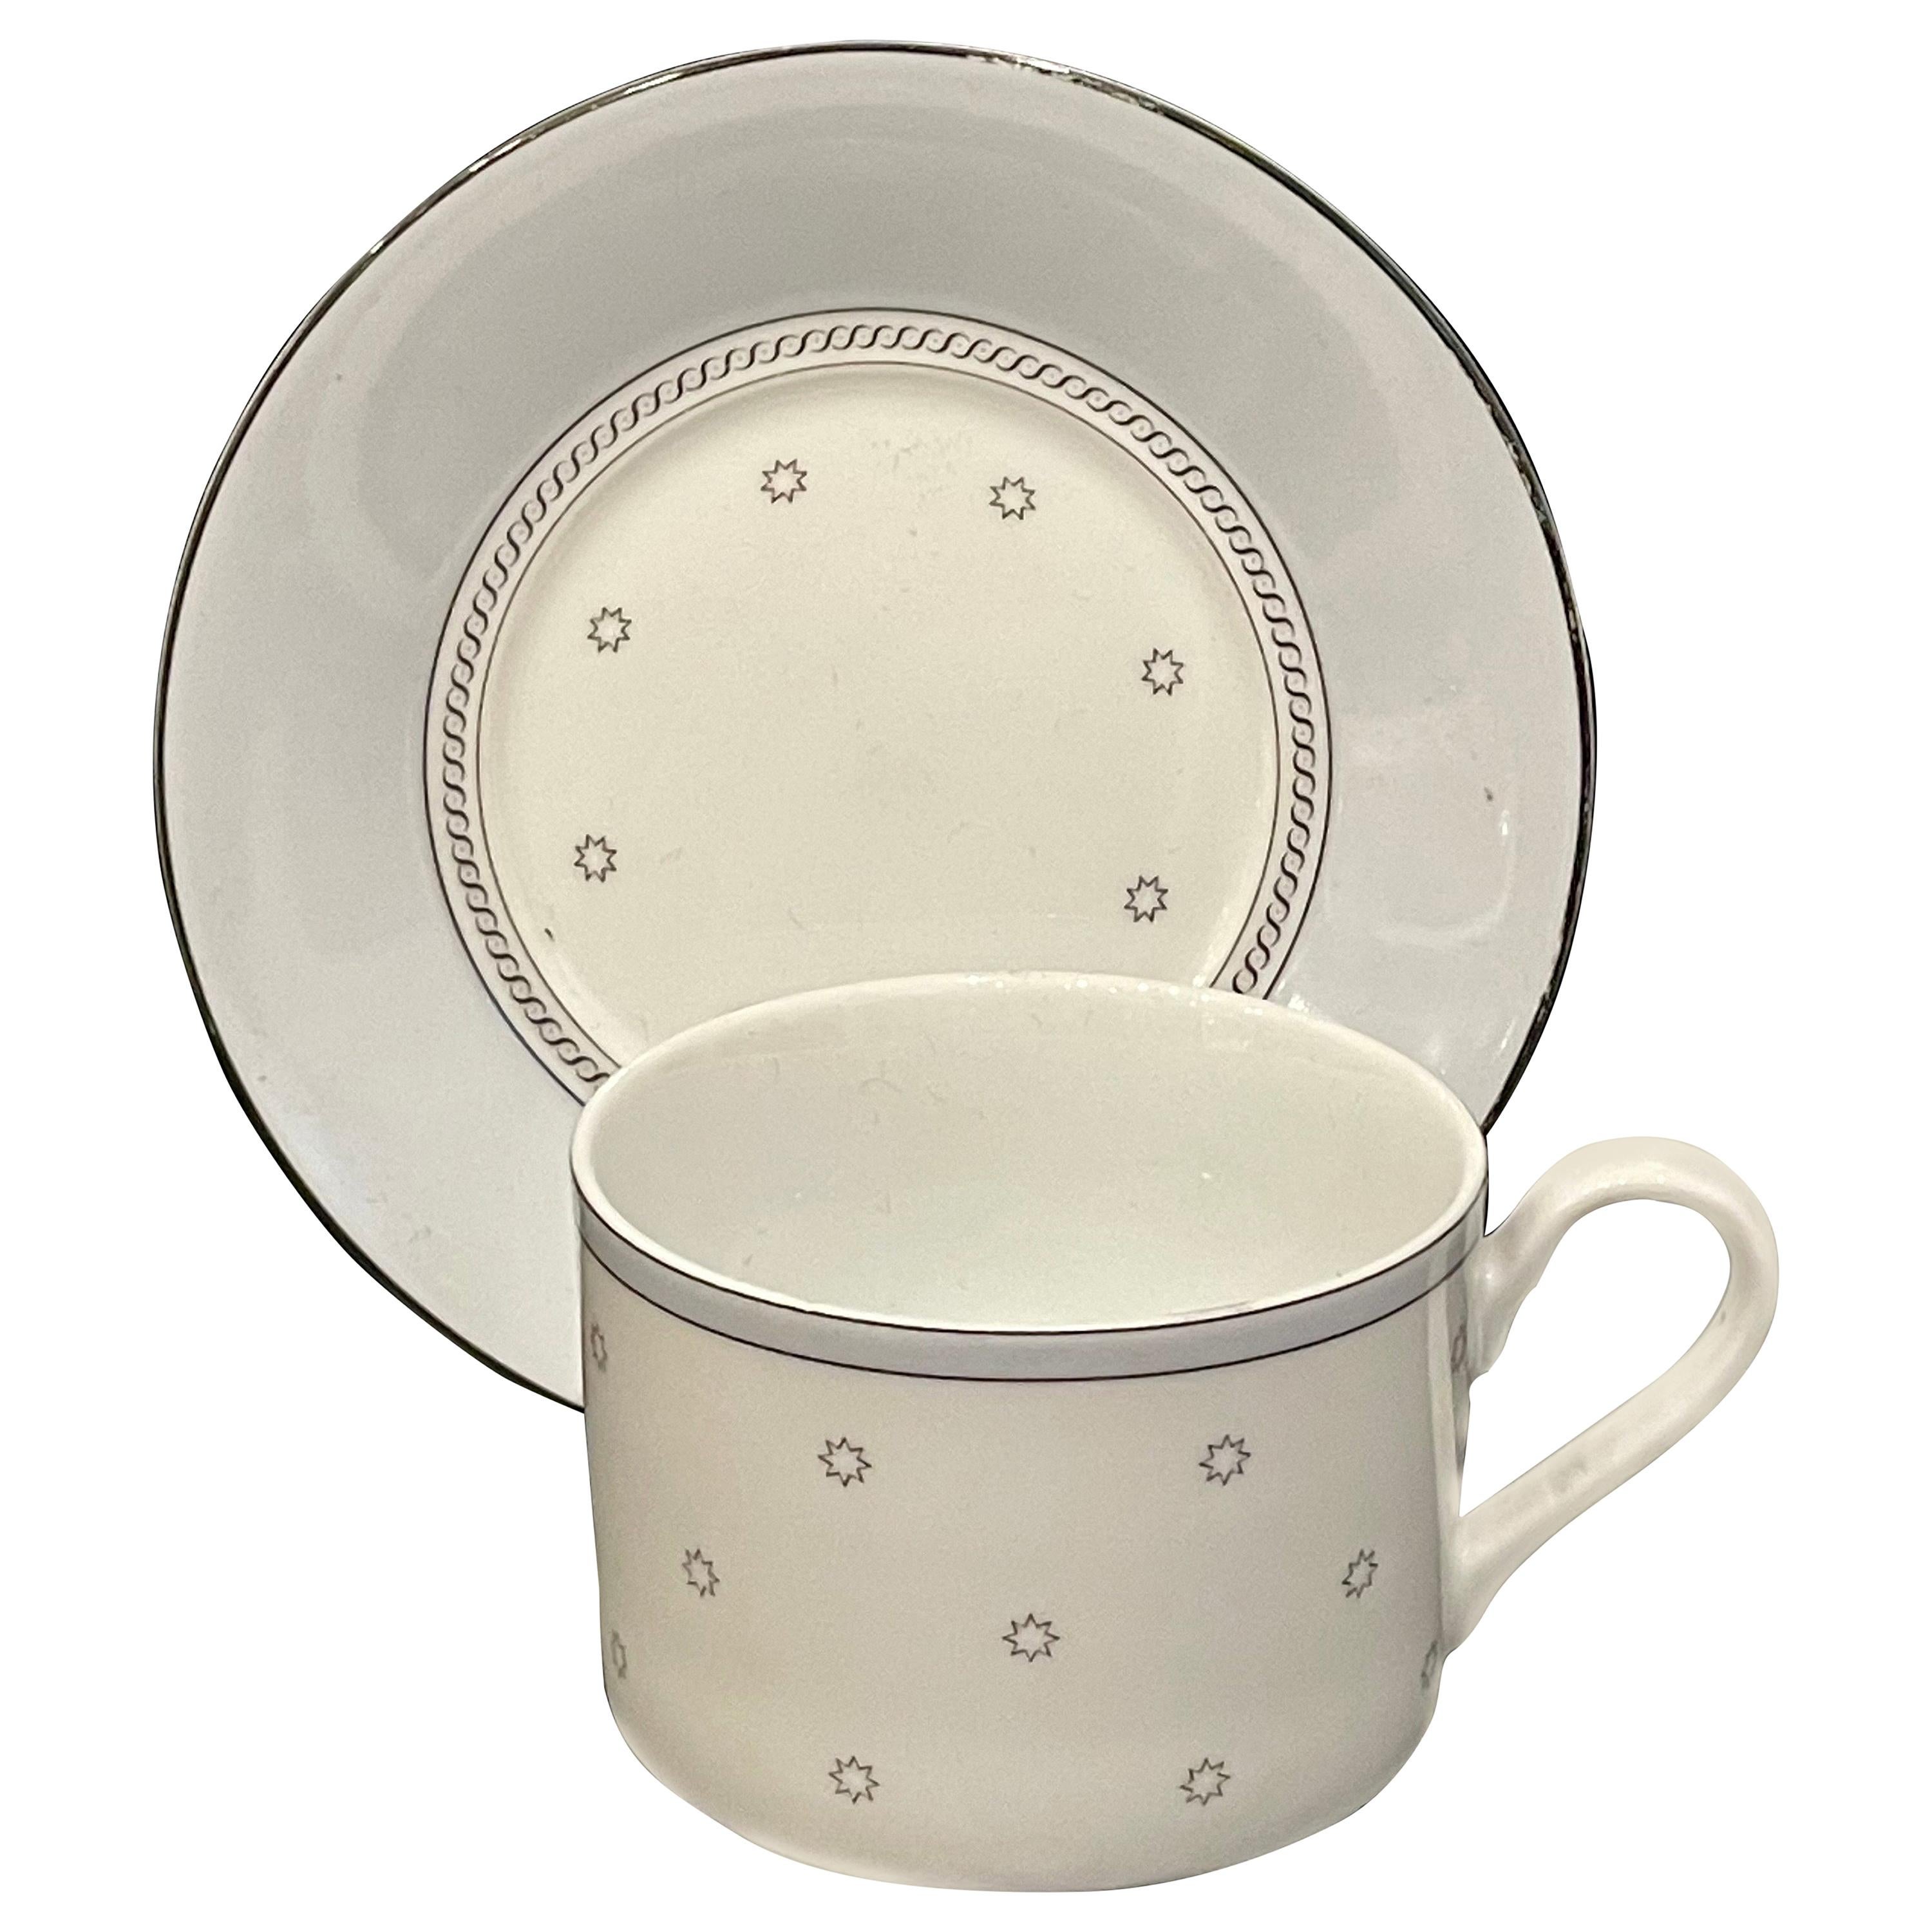 Cup & Saucer Designed by Michael Graves for Swid Powell Cityline Corinth